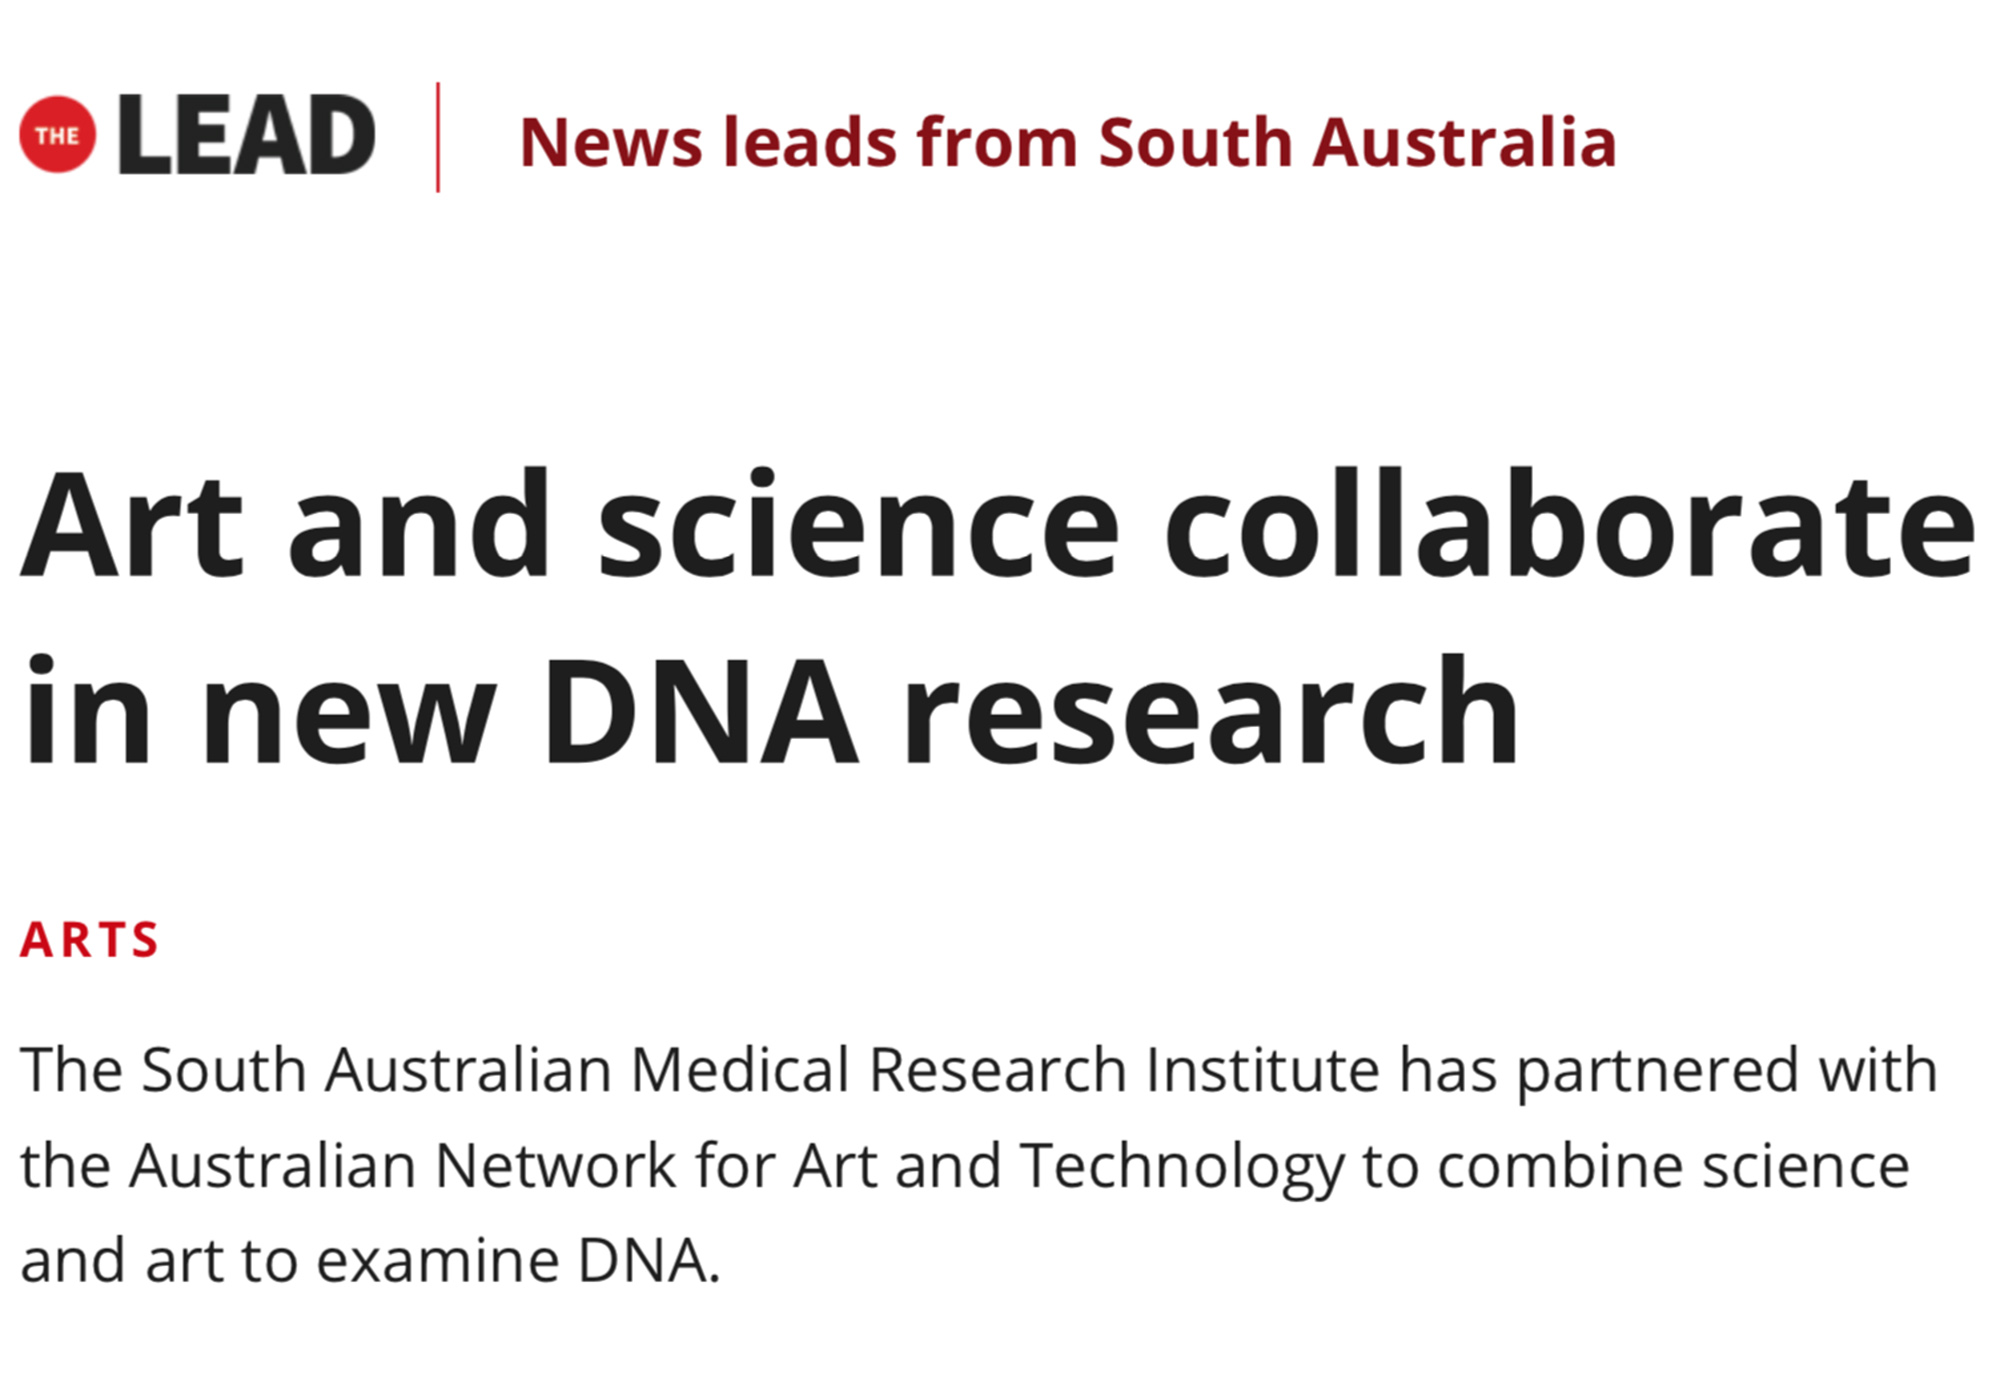 Headline, article in The Lead, ‘Art and Science collaborate in new DNA research’